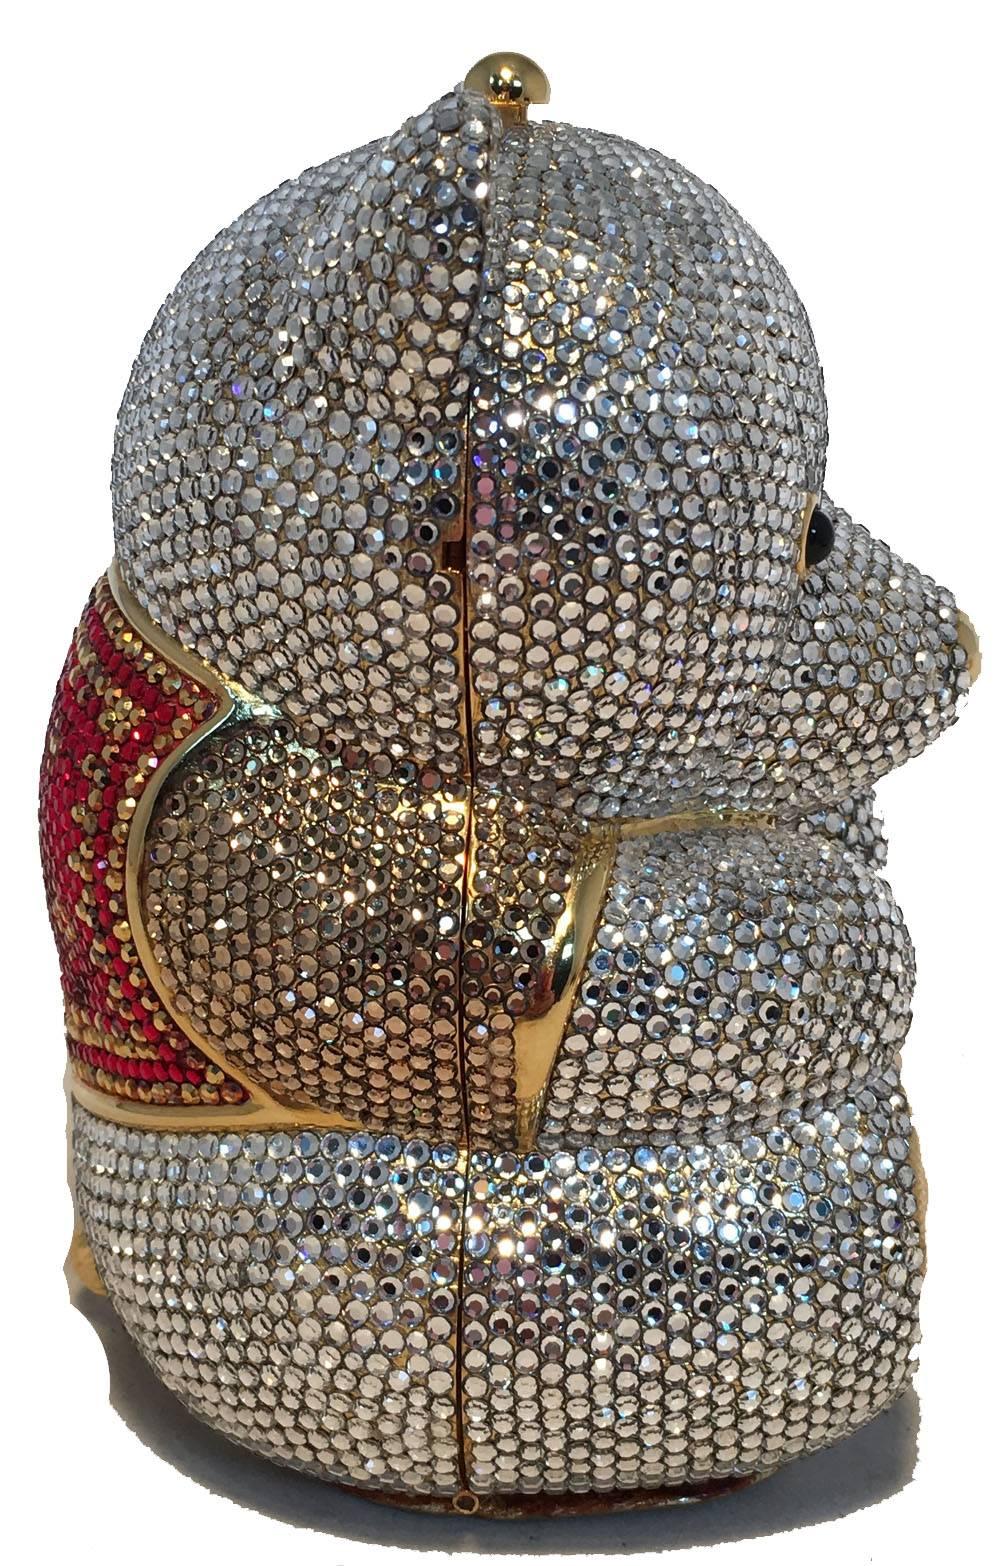 ADORABLE Judith Leiber teddy bear minaudiere in excellent condition. Clear swarovski crystal exterior with red crystals on vest, Black semi precious stone eyes and gold form body throughout. Gold leather base. Top button closure opens to a gold